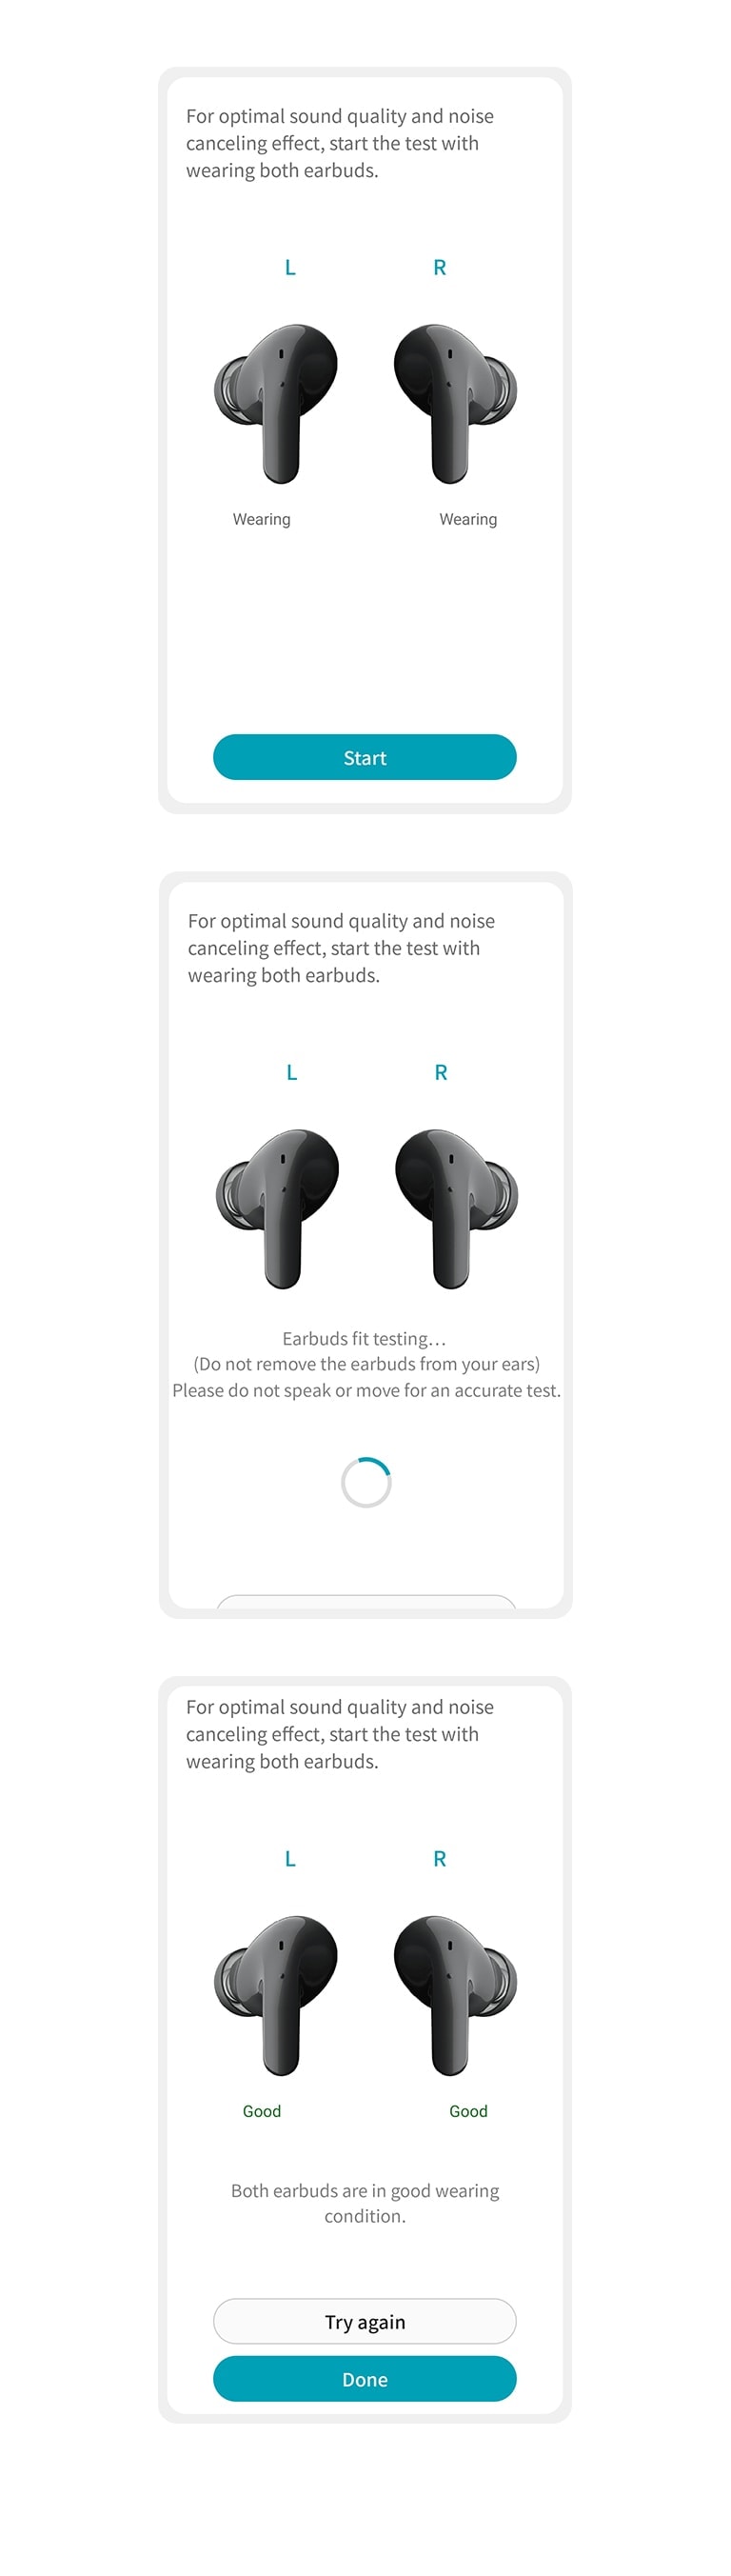 Images of the app showing suggestions on how to adjust the earbuds for a perfect fit.